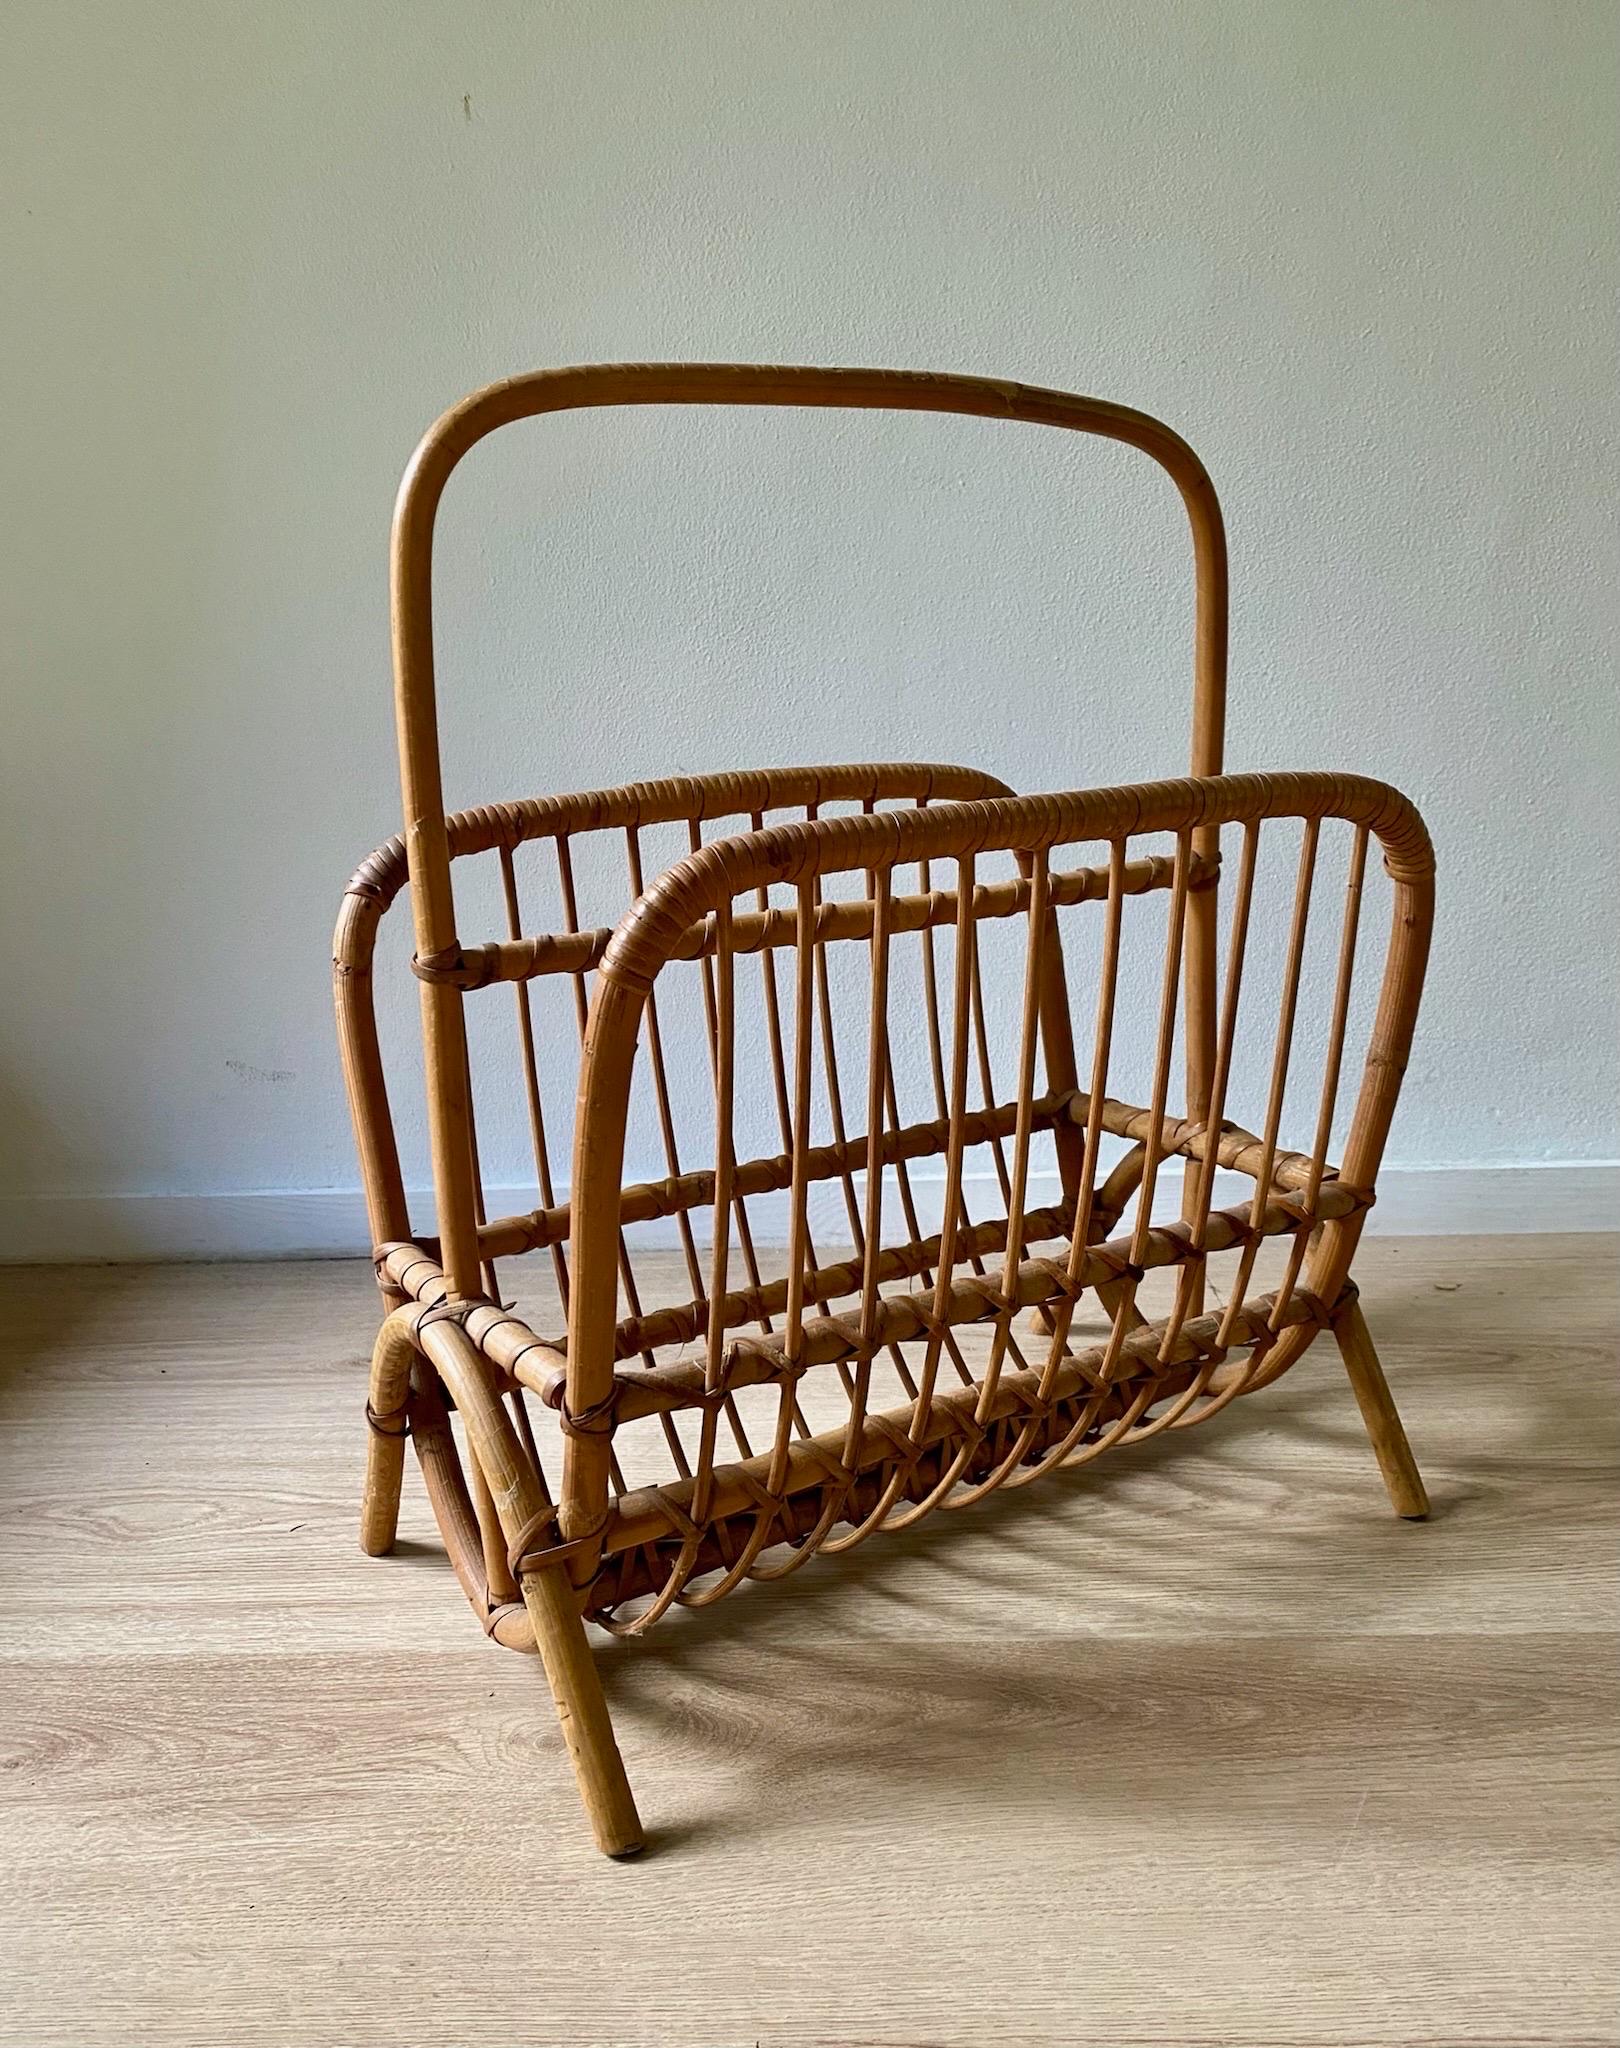 Mid-Century Modern Bamboo and Rattan Magazine Holder with handle ca. 1960's
By unknown designer and manufacturer, but similar with work of Rohé Noordwolde. Style similar to Franco Albini.

In original condition with minor wear, consistent of age